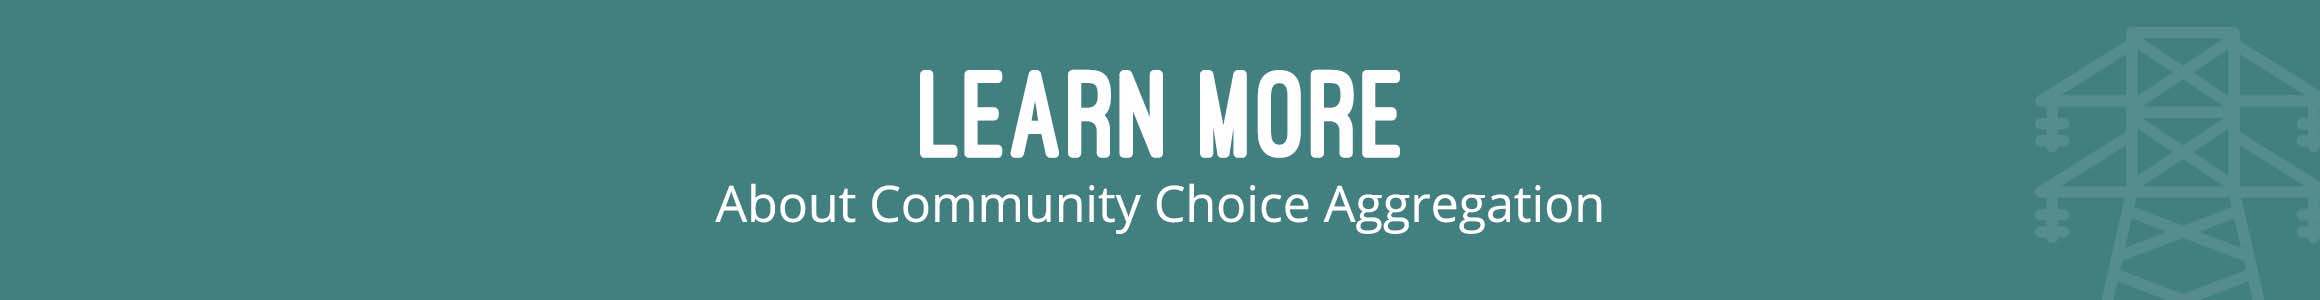 Learn More about Community Choice Aggregation